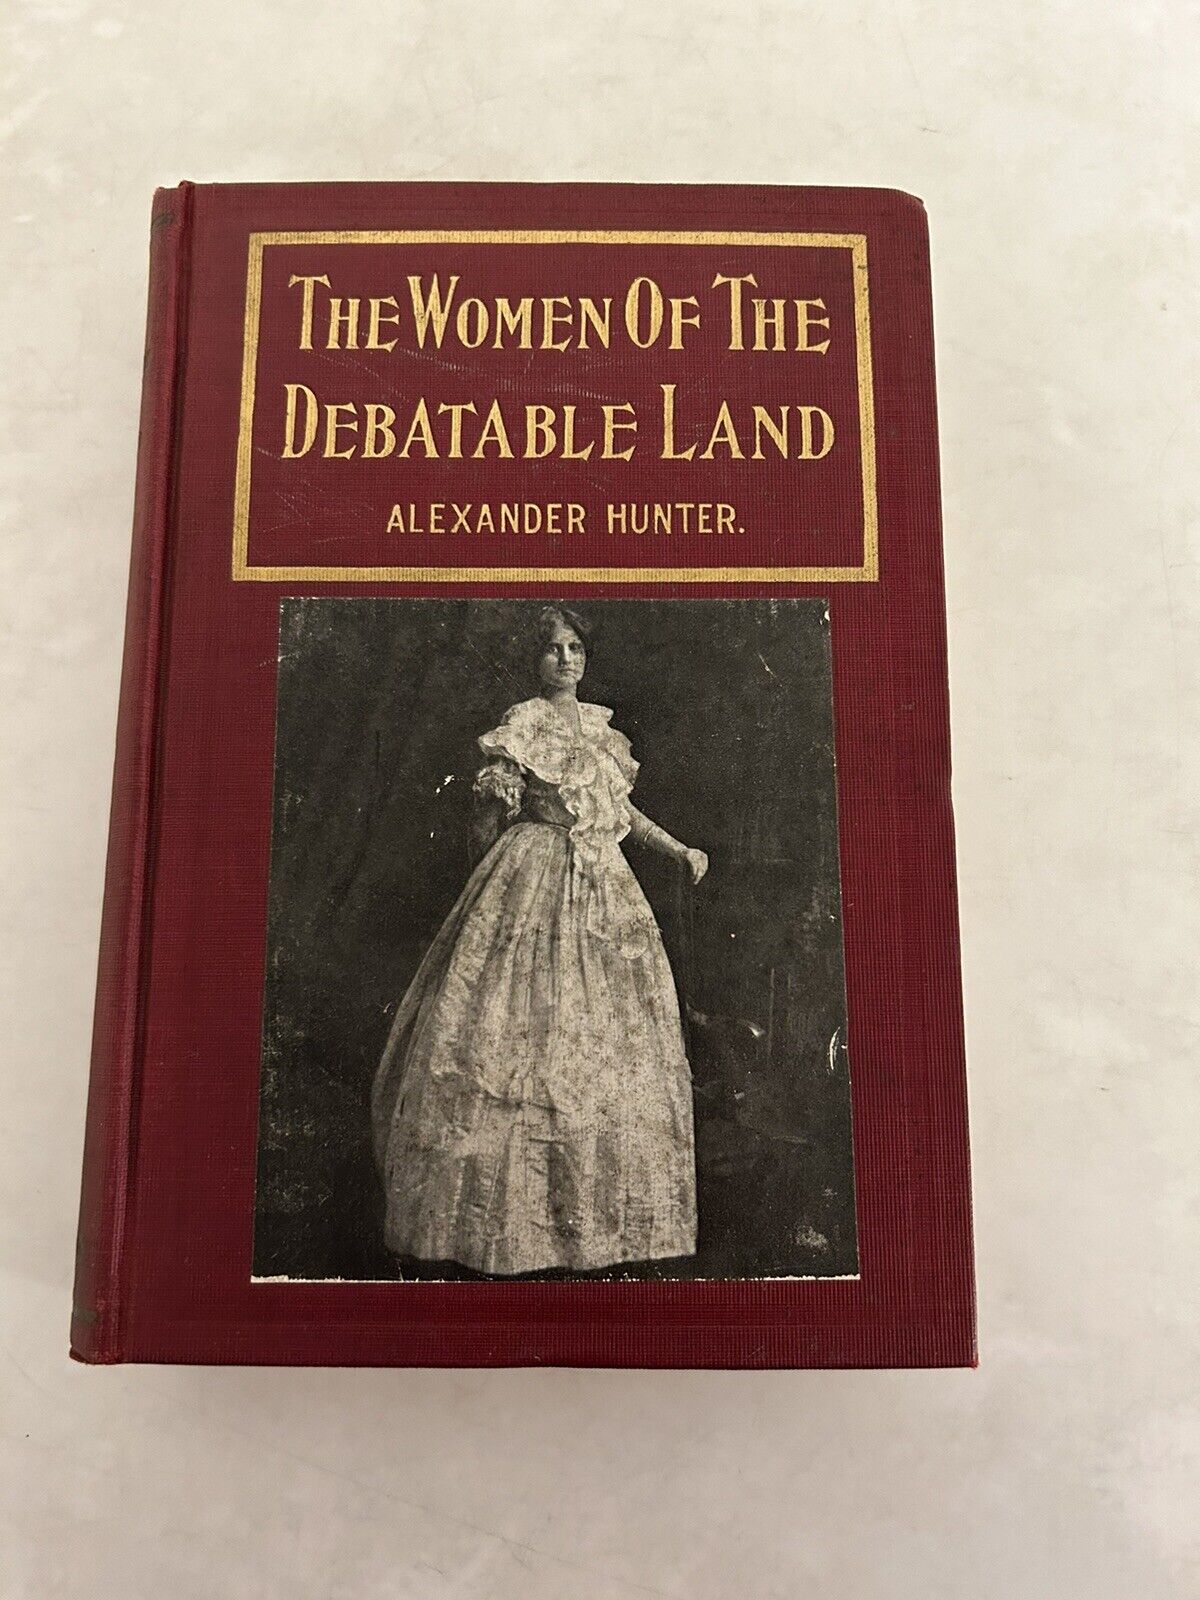 The Women Of The Debatable Land by Alexander Hunter, 1912